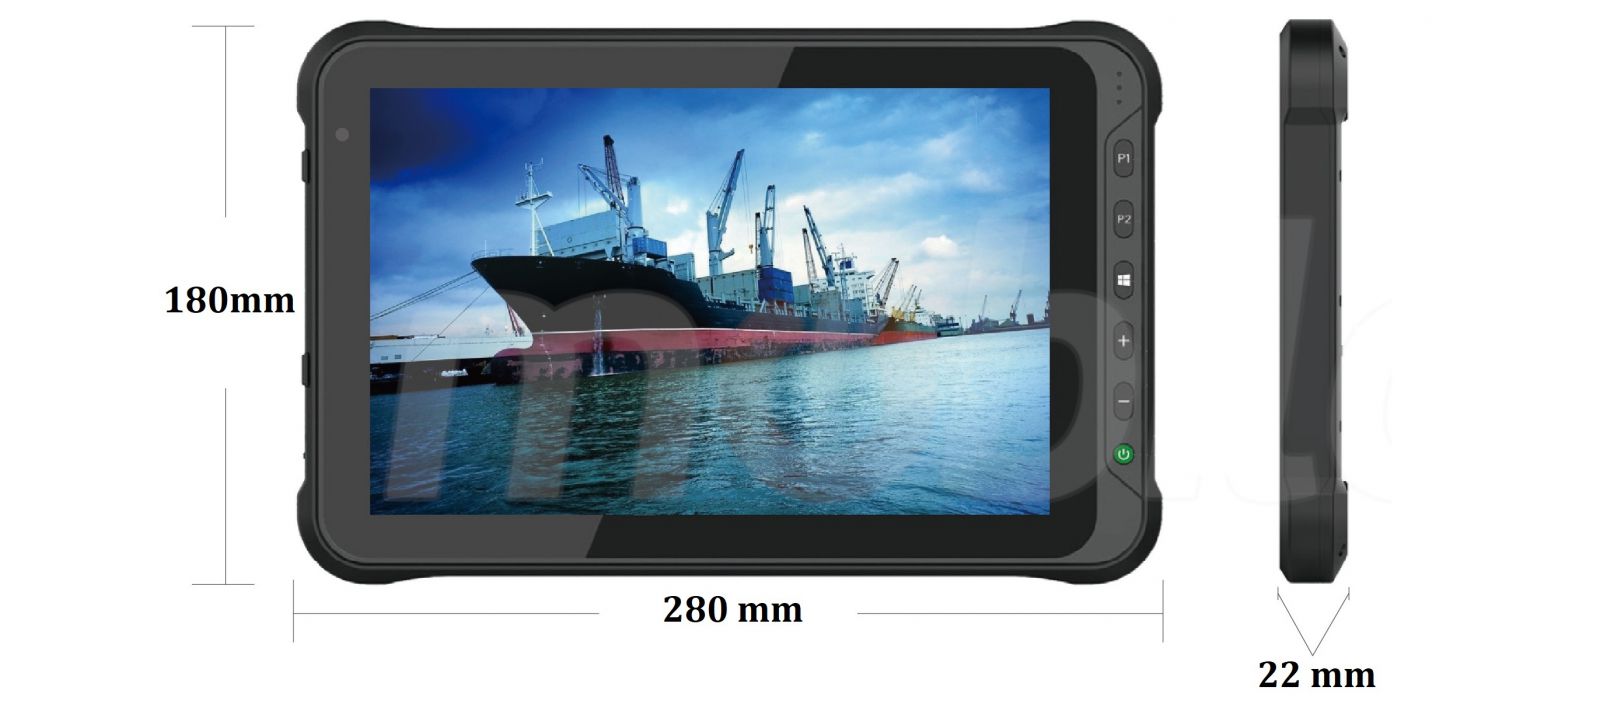 Rugged 10 inch industrial tablet with a large battery, NFC, 4GB RAM, 64GB ROM, Bluetooth 4.2, NFC and a Honeywell 2D barcode scanner - Emdoor I15HH v.2 